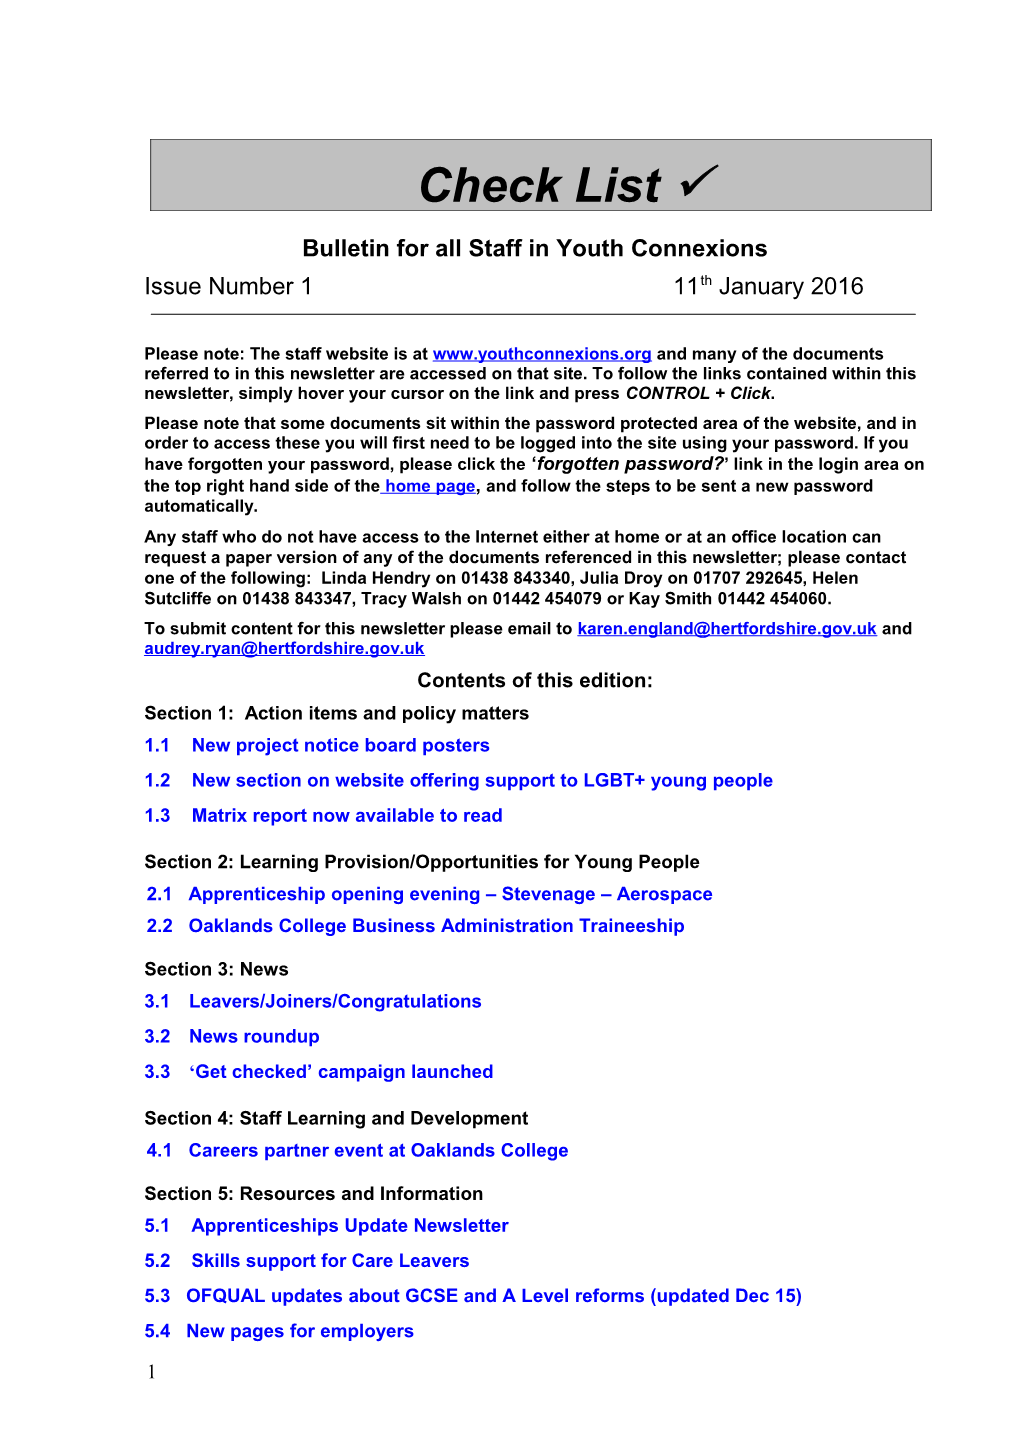 Bulletin for All Staff in Youth Connexions